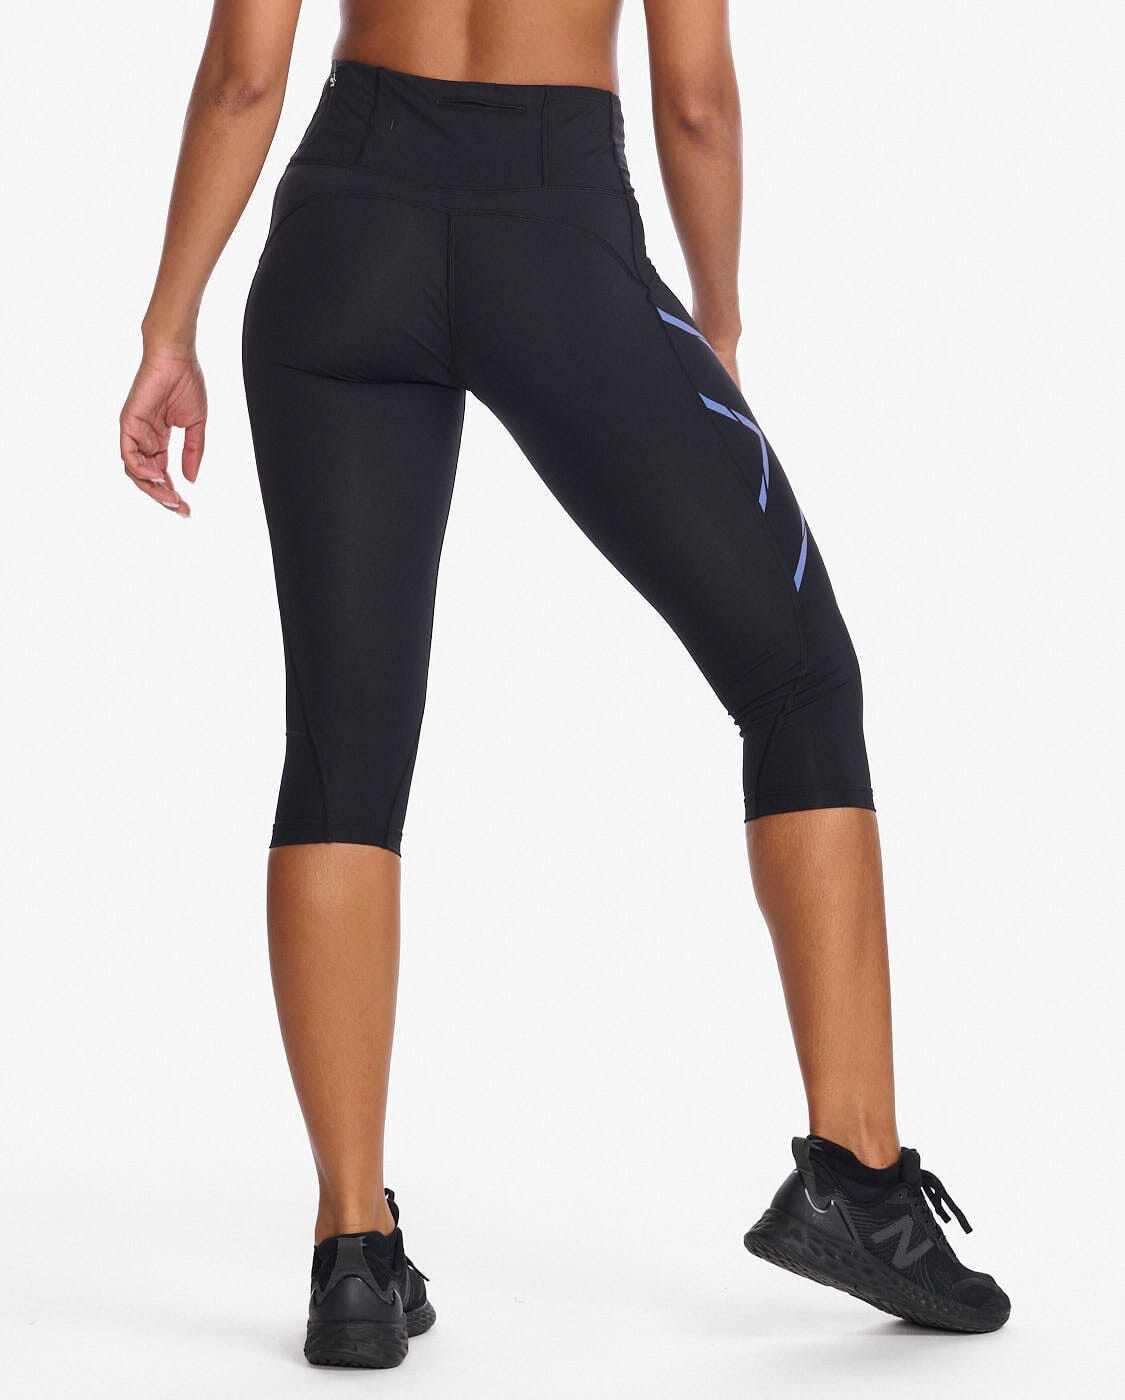 Women's 2XU Light Speed Mid-Rise Compression Tights